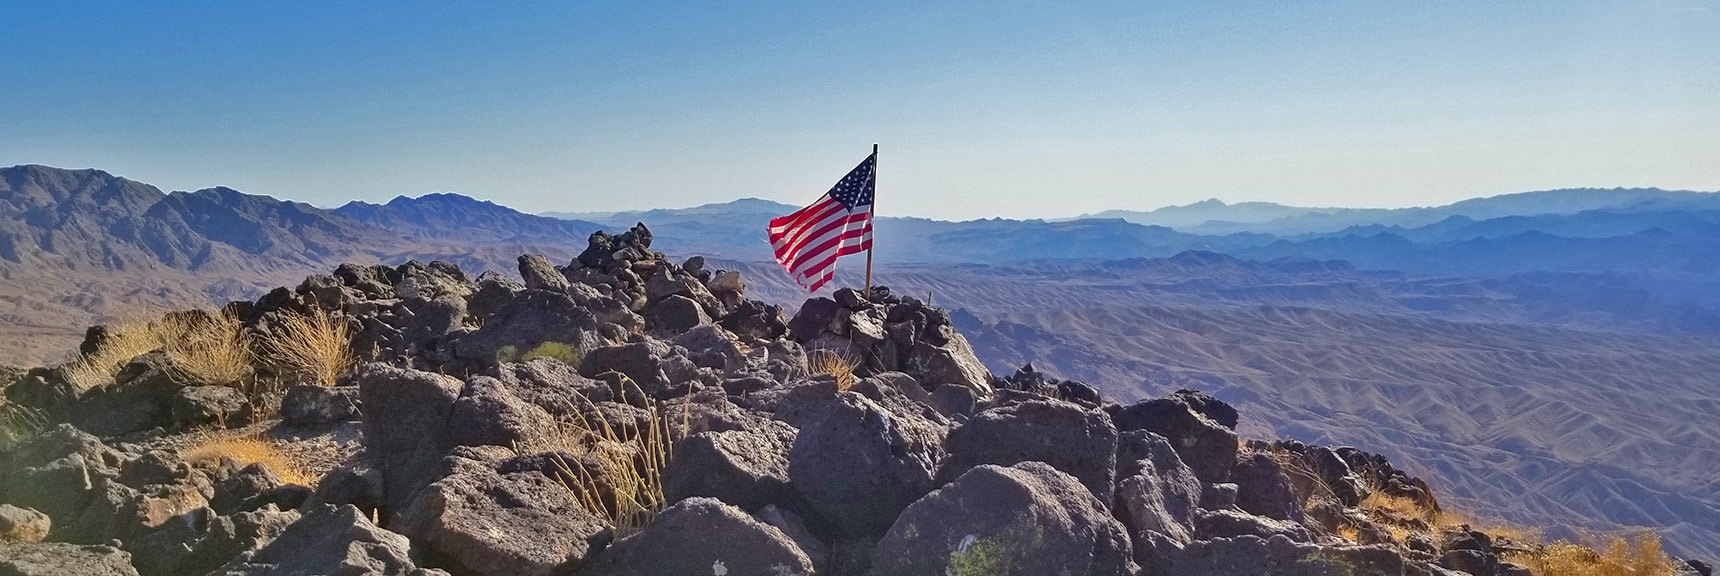 Flag Waving in the Wind on Fortification Hill Summit | Fortification Hill | Lake Mead National Recreation Area, Arizona